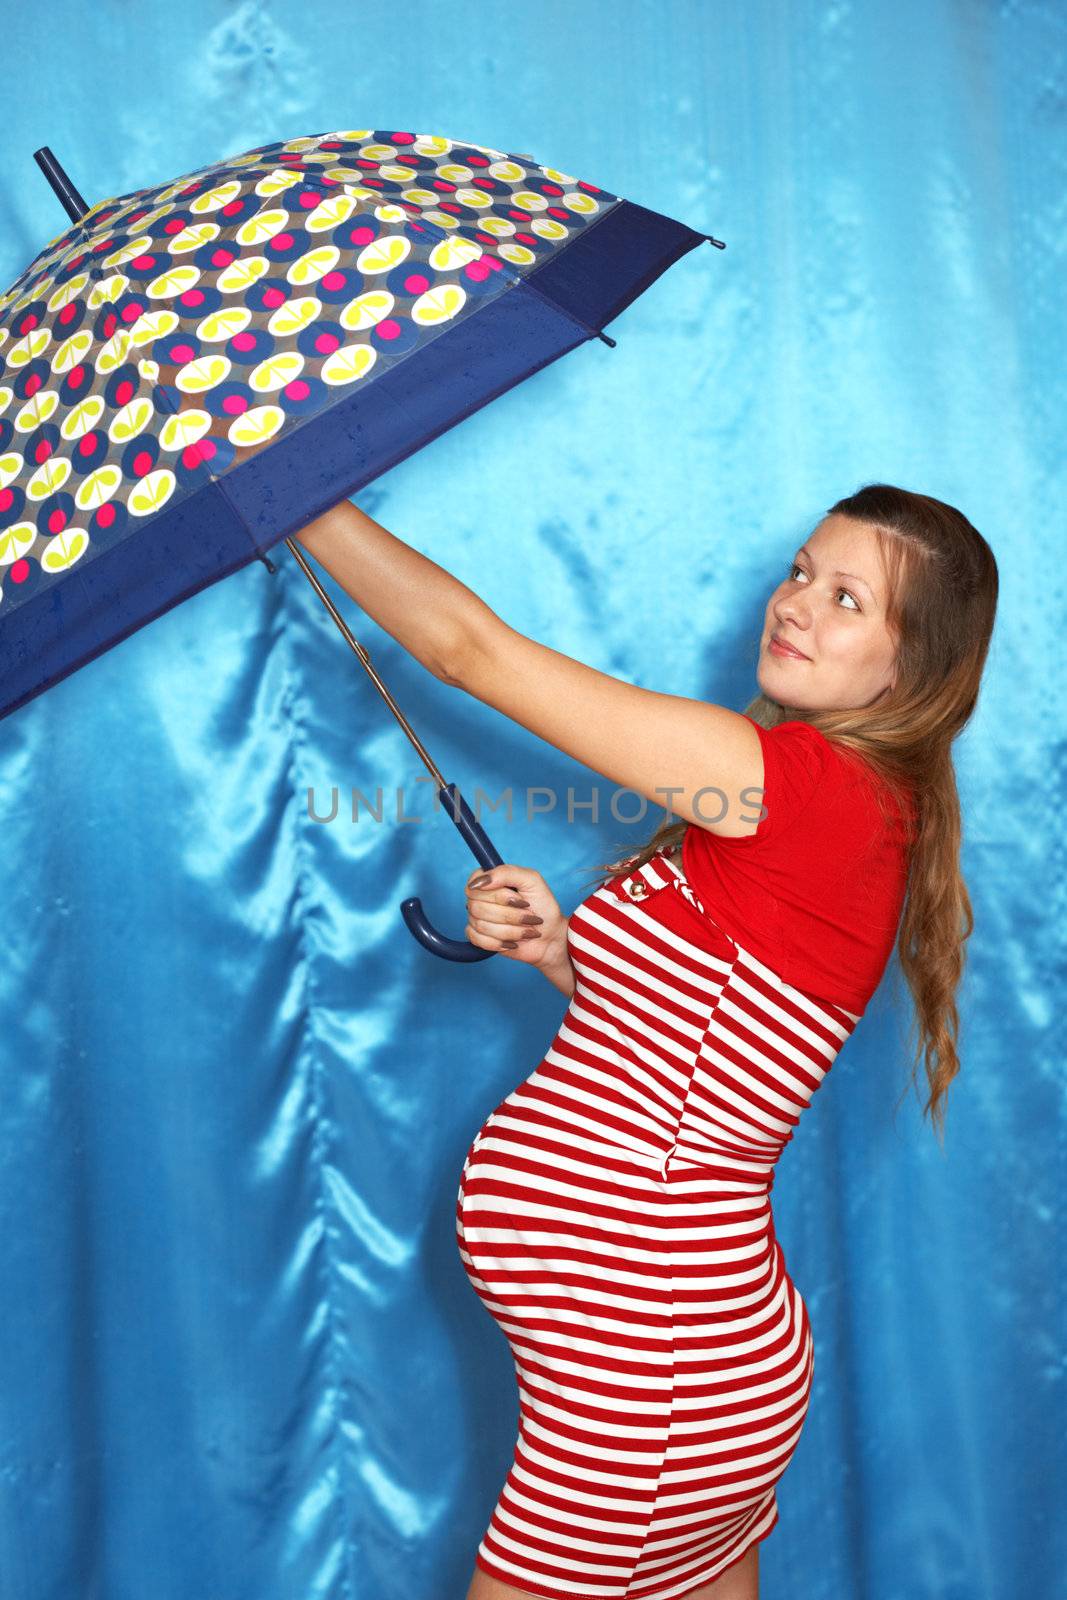 A pregnant woman and umbrella on a blue background